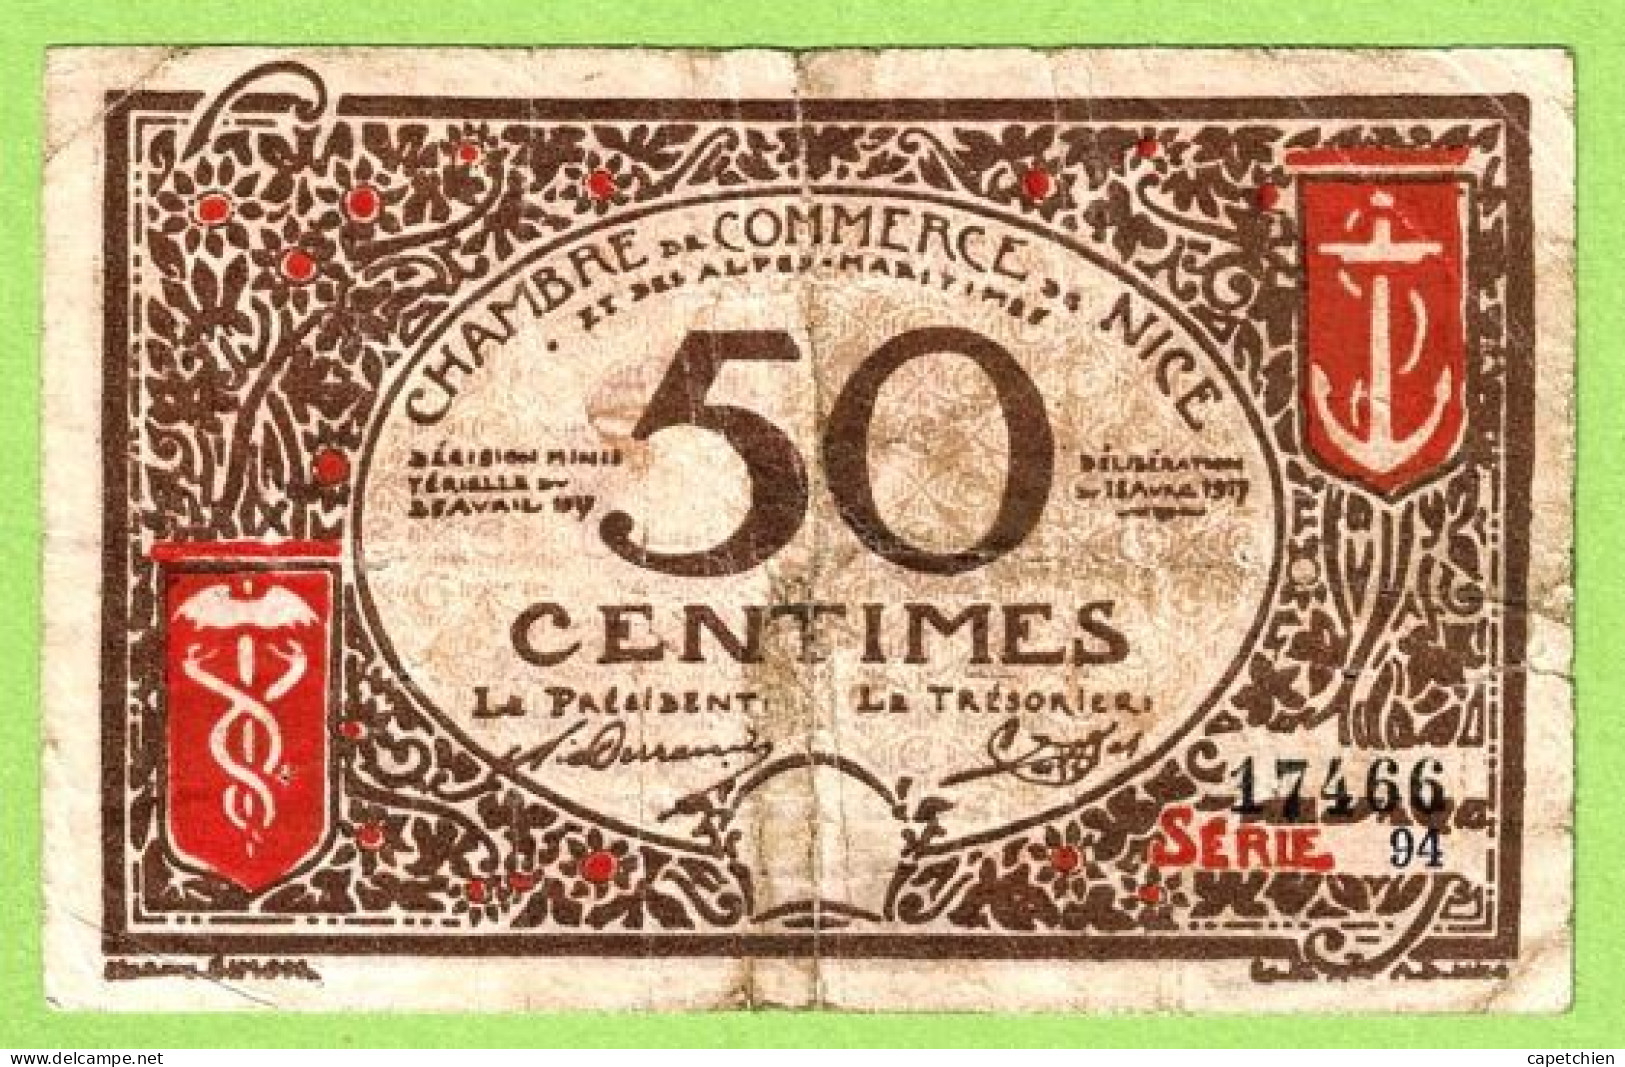 FRANCE / CHAMBRE De COMMERCE / NICE - ALPES MARITIMES / 50 CENTIMES / 1917 - 1921 SURCHARGE 1920 - 1921 / N° 17466 - Chamber Of Commerce